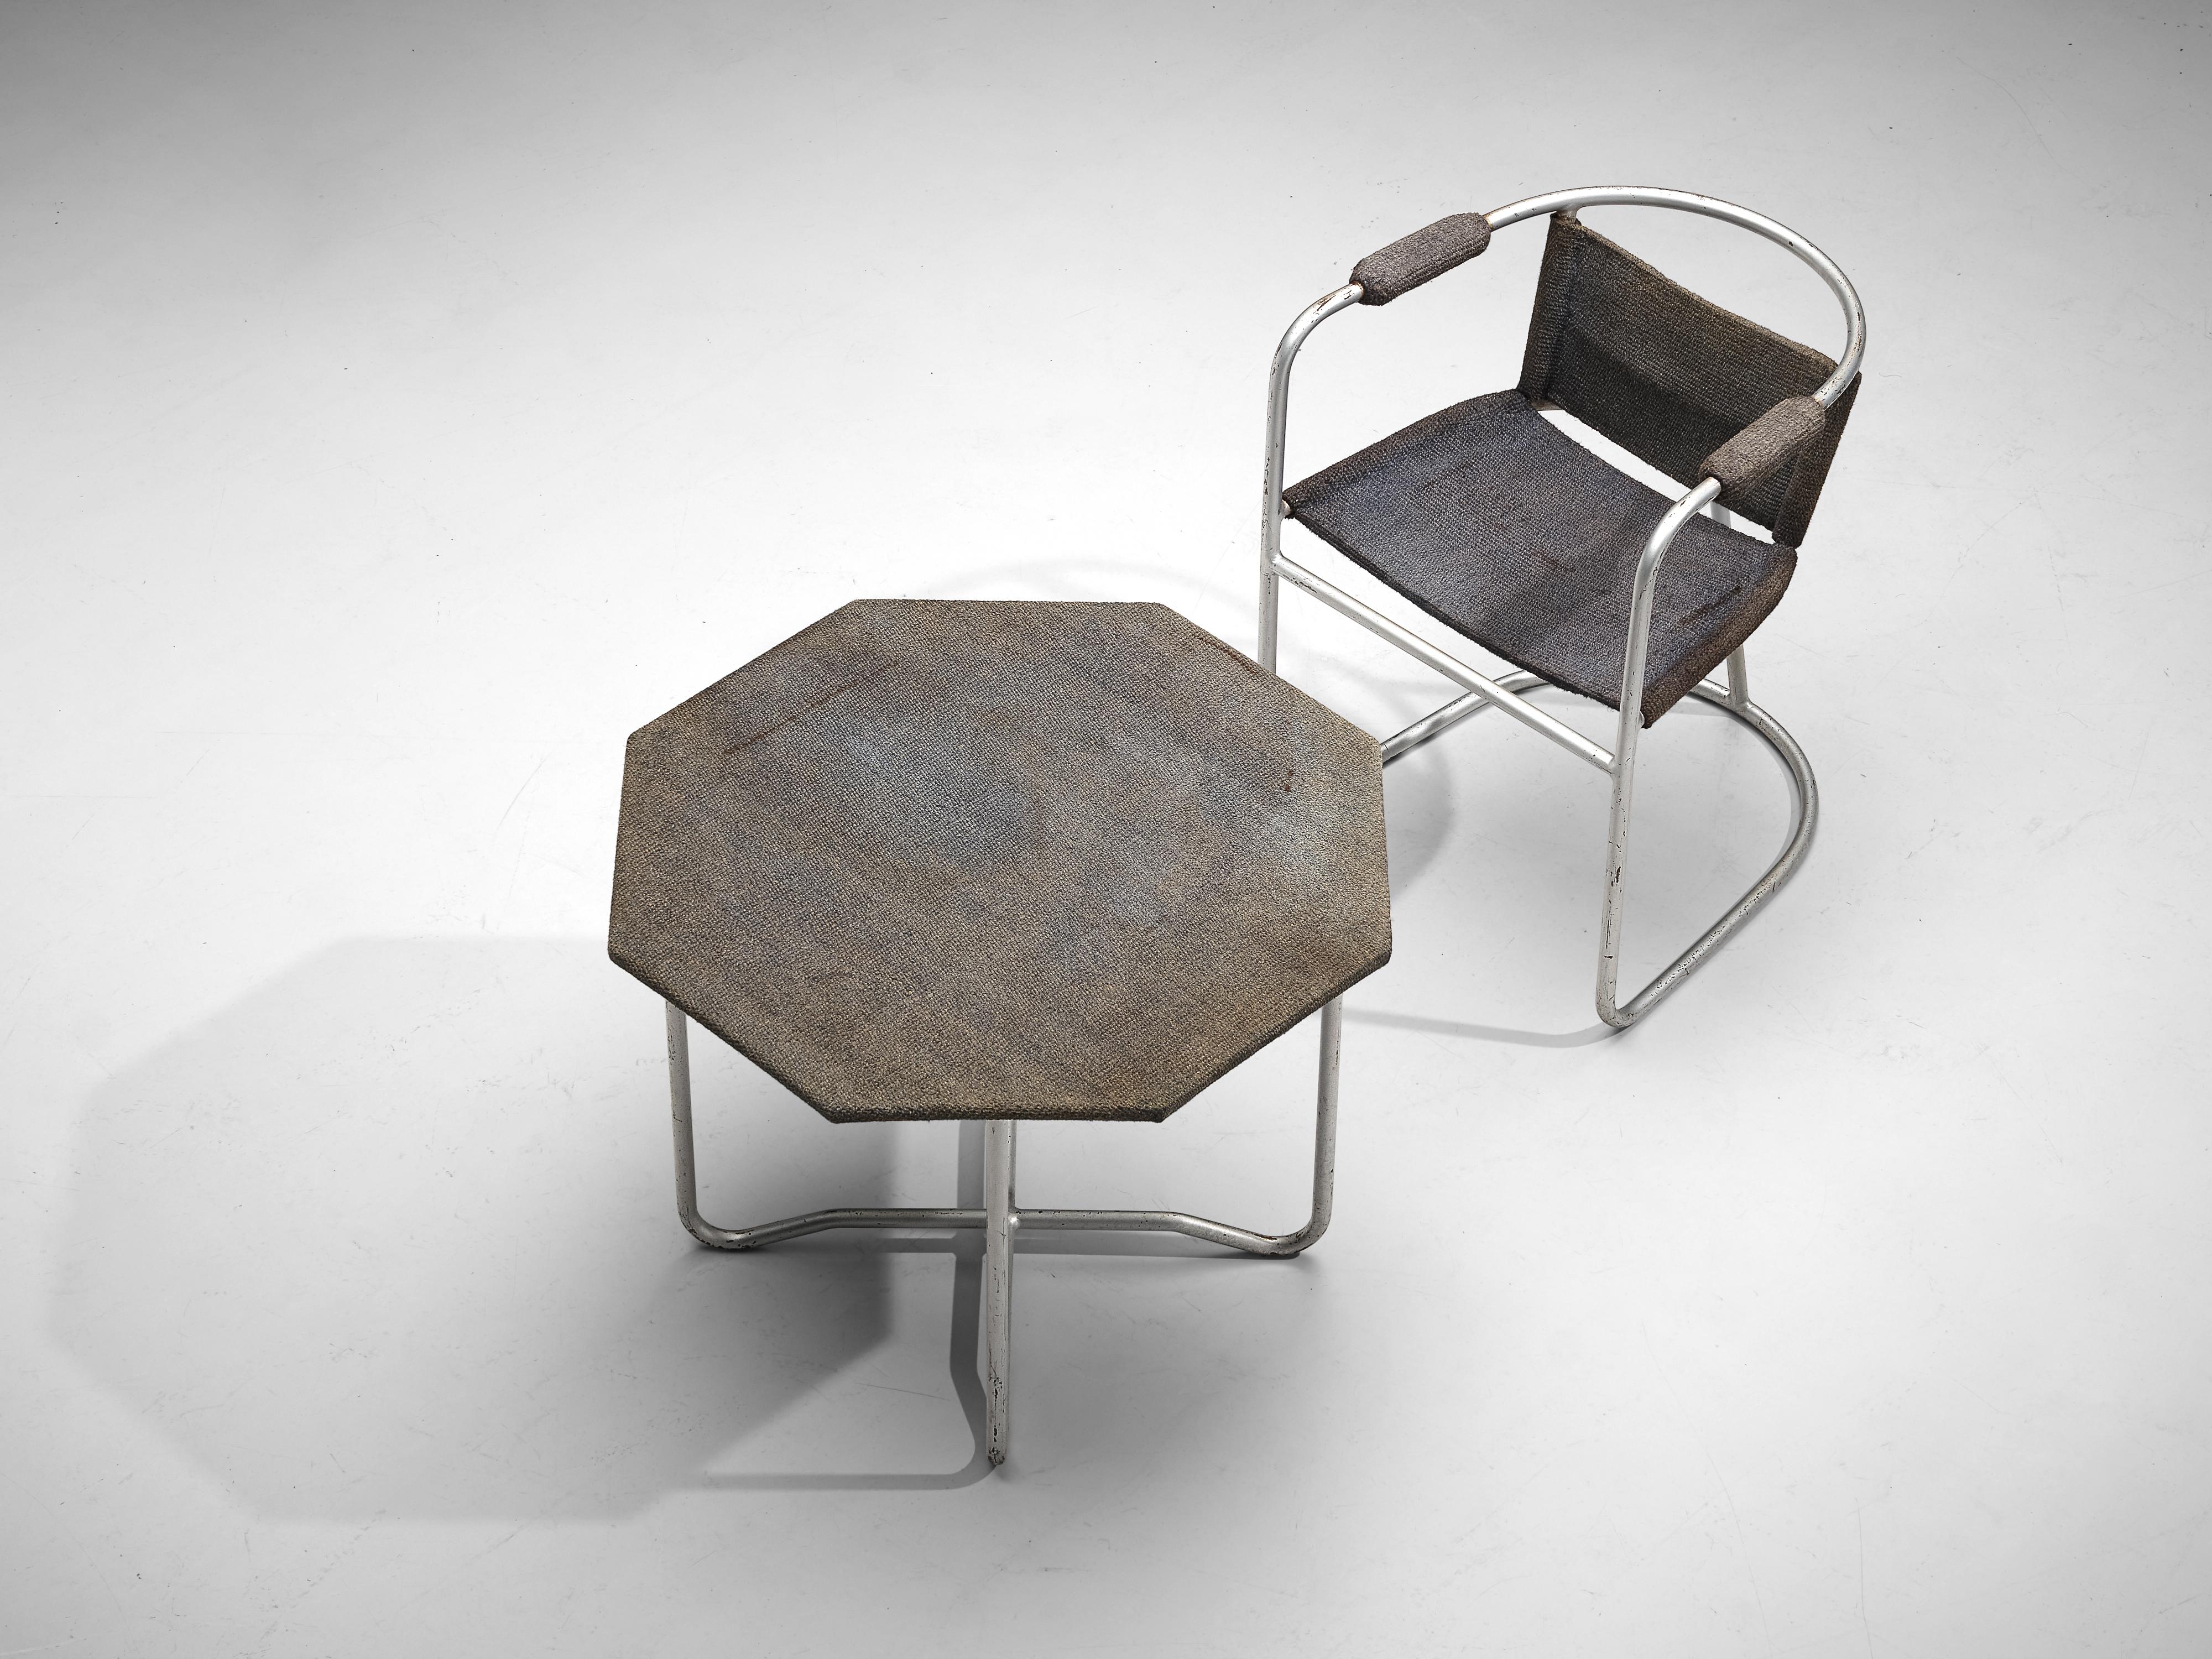 Bas van Pelt, coffee table and armchair, metal, sisal, the Netherlands, 1930s

Wonderful set of Bas van Pelt side table and armchair. Both items are made of tubular metal that has gained a striking patina over time. Same goes for the sisal